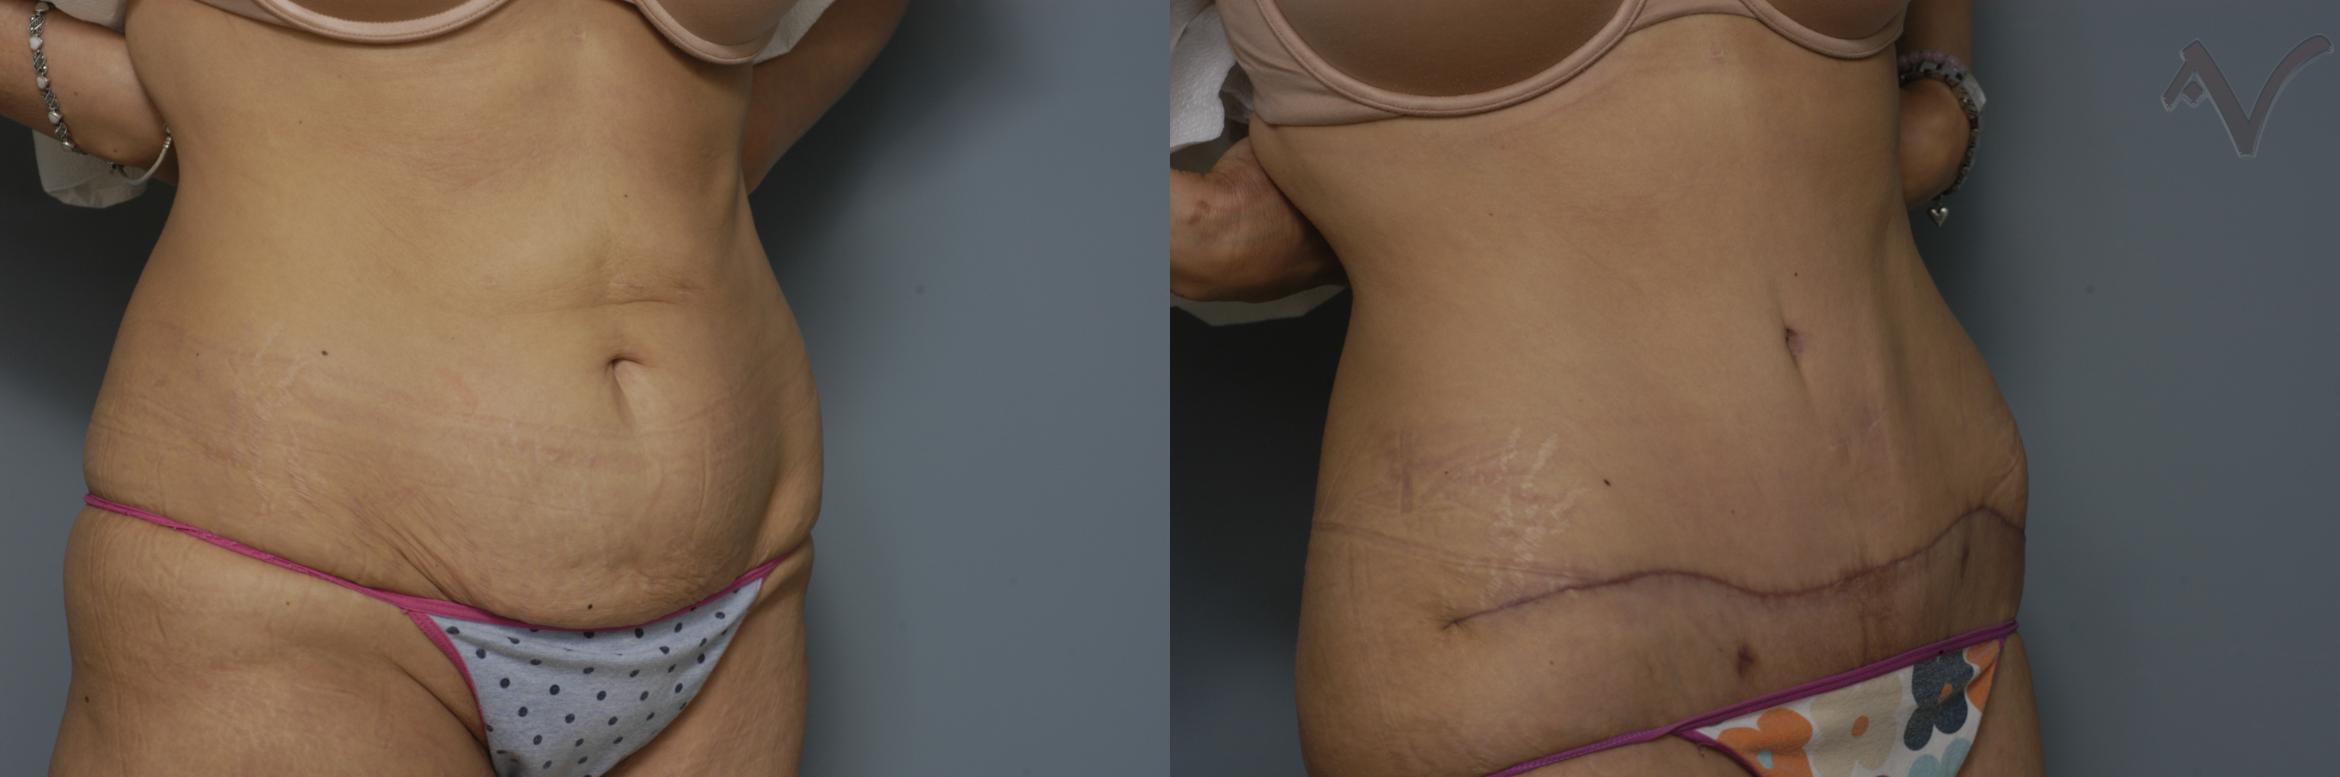 Before & After Tummy Tuck Case 245 Right Oblique View in Burbank, CA